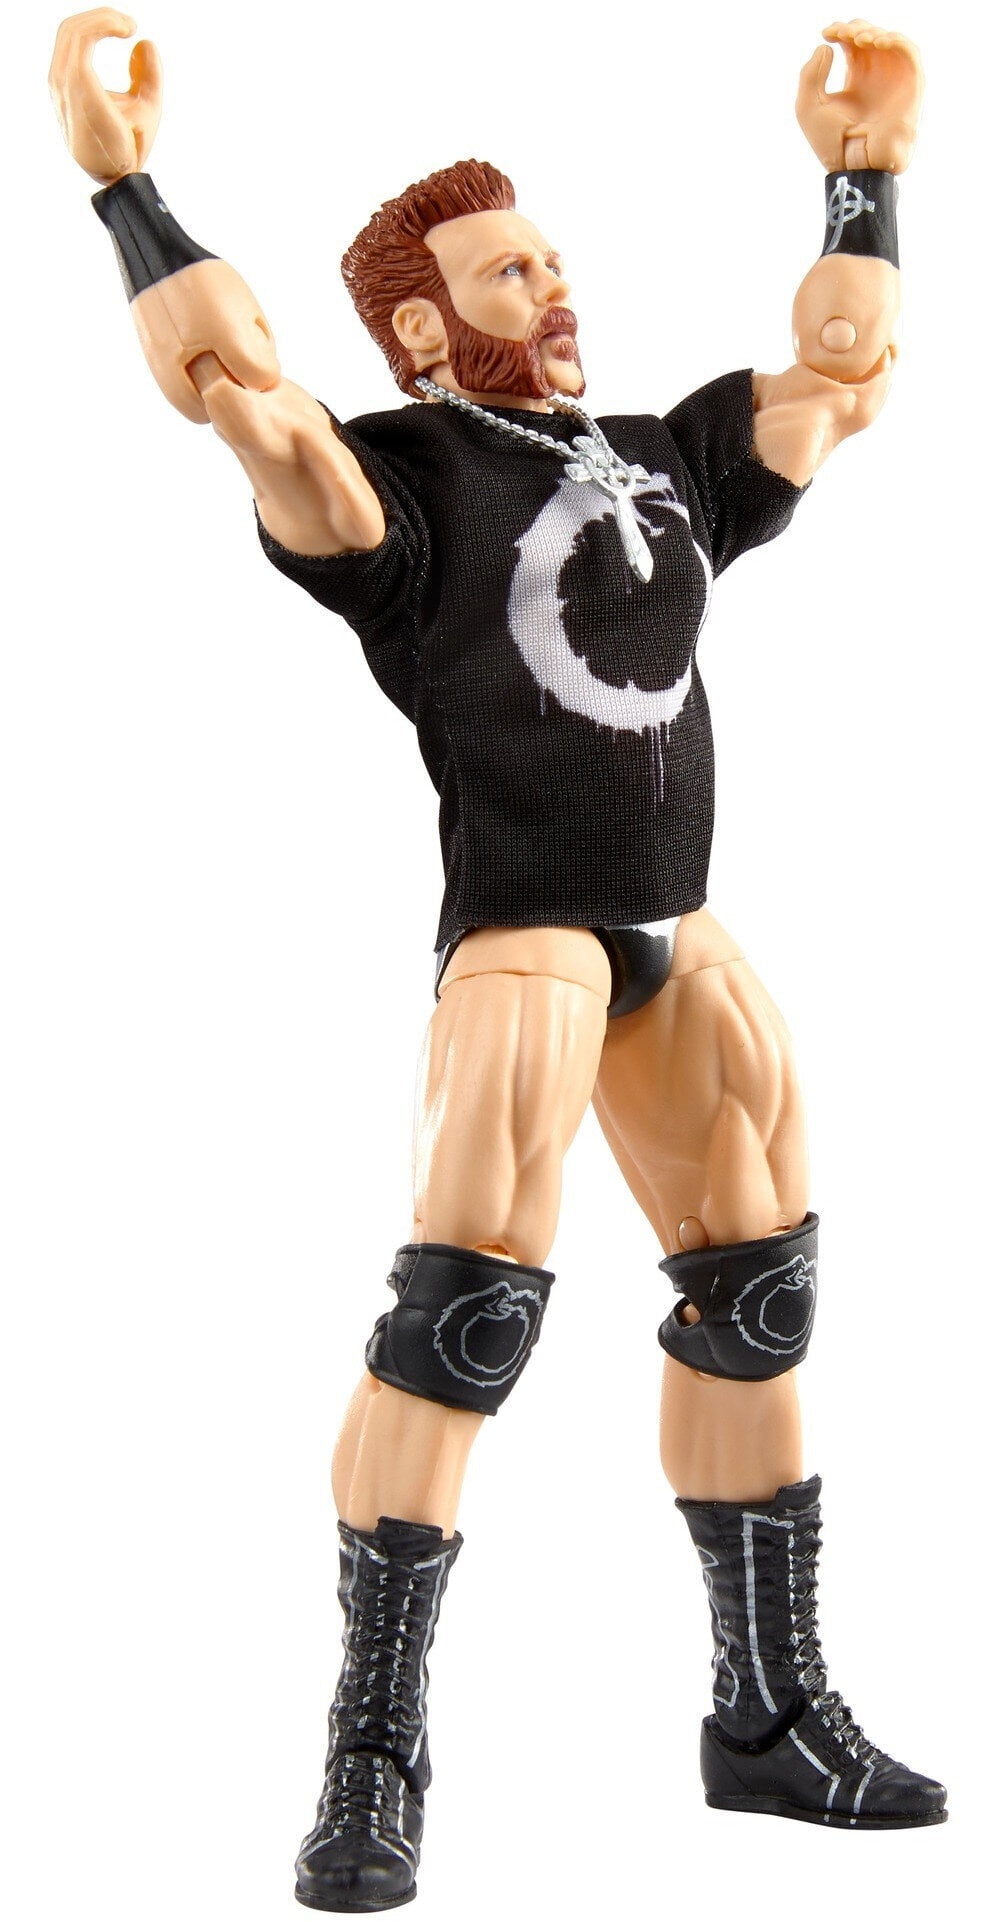 WWE Royal Rumble Elite Collection Action Figure-Stone Cold Steve Austin NUOVO * 